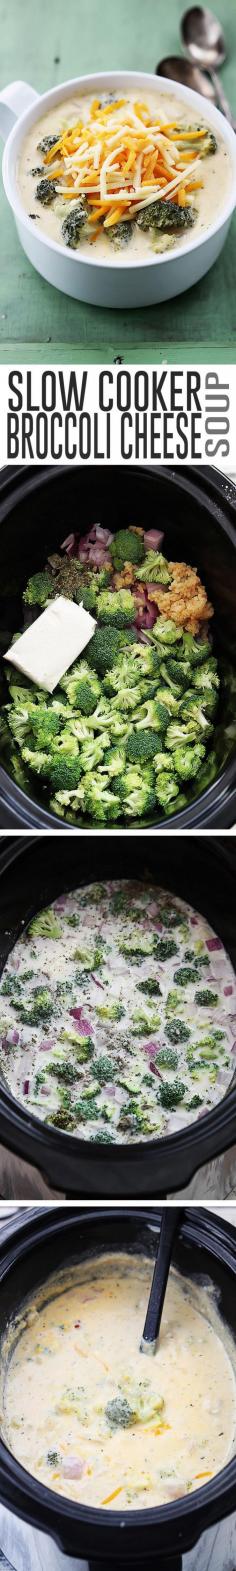 Easy slow cooker broccoli soup. Cook 4-6 hours on low or 3-4 on high.